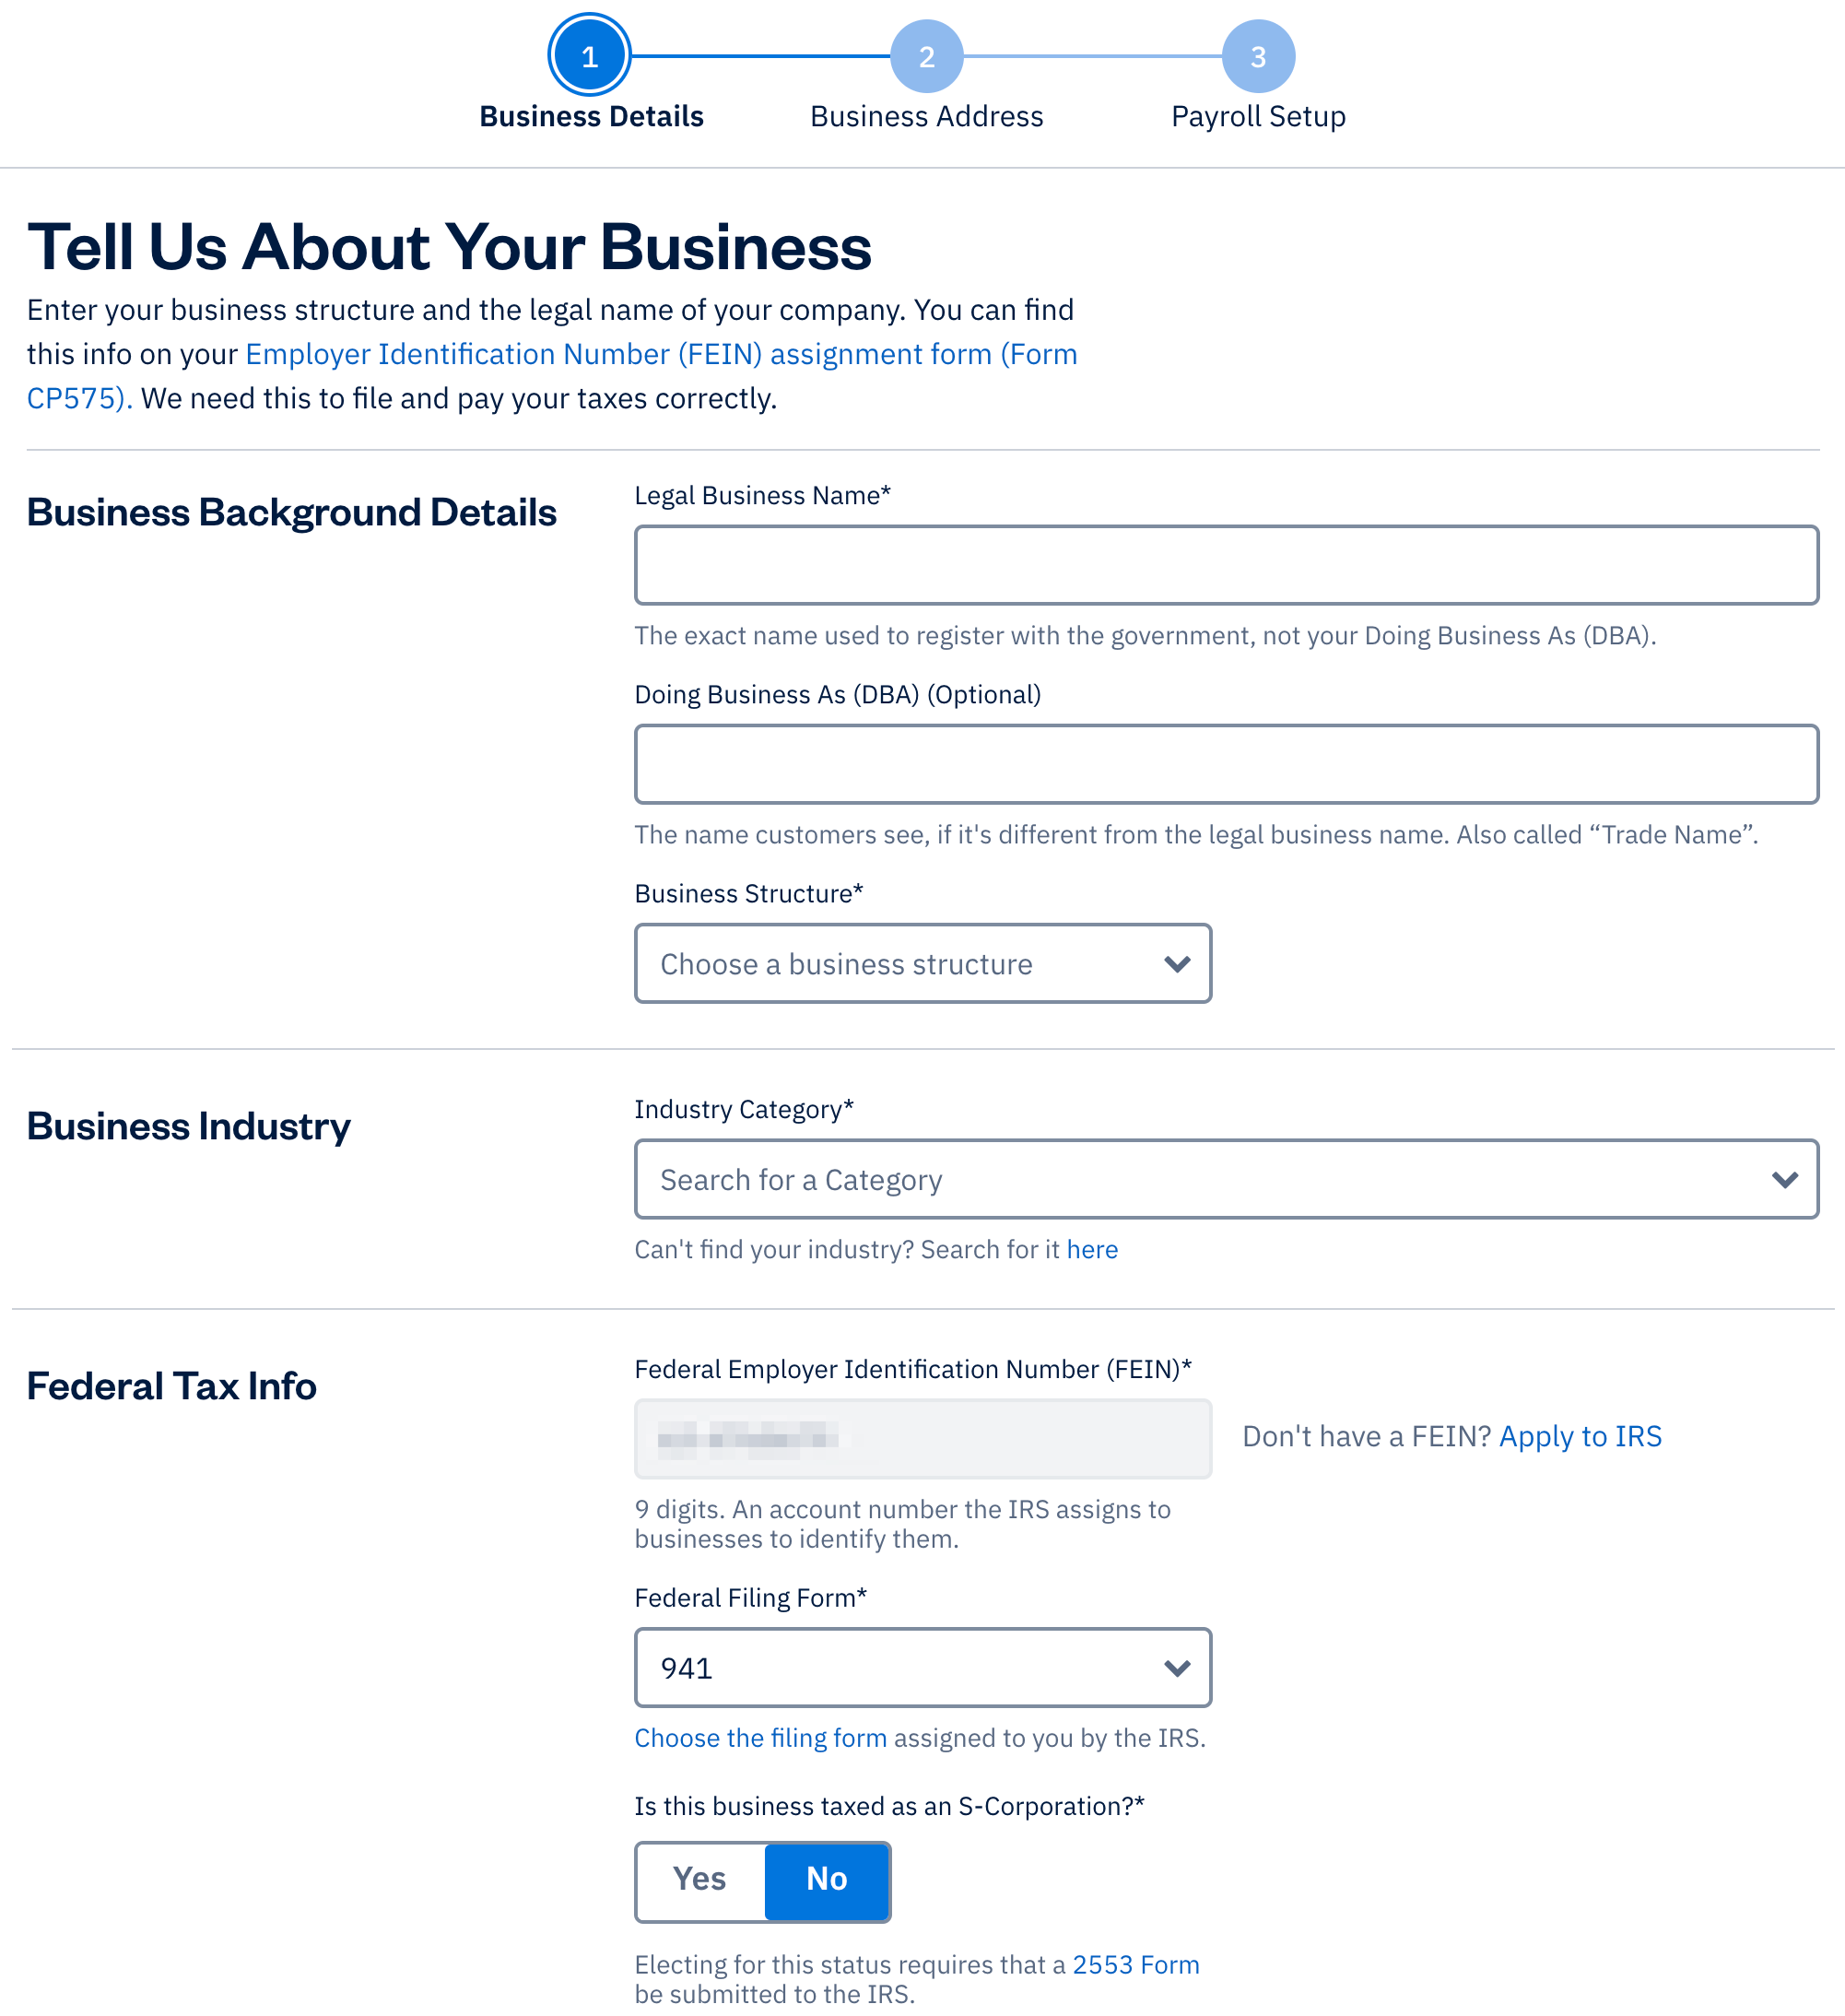 Business details section with fields to fill out.